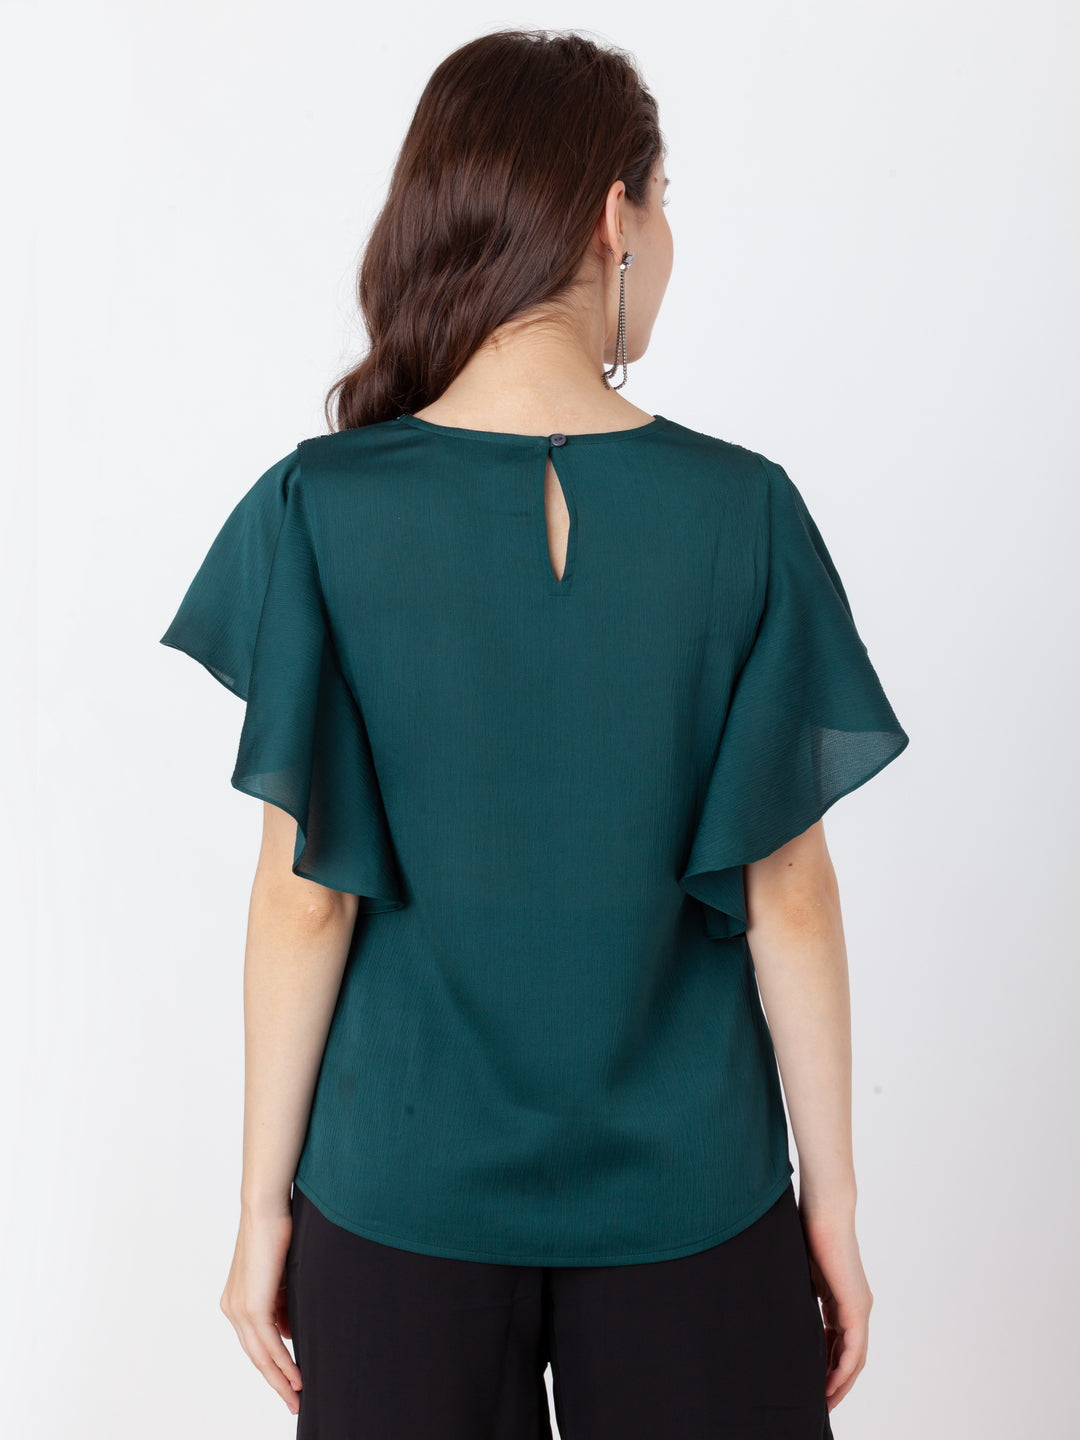 Green_Embroidered_Regular_Top_4